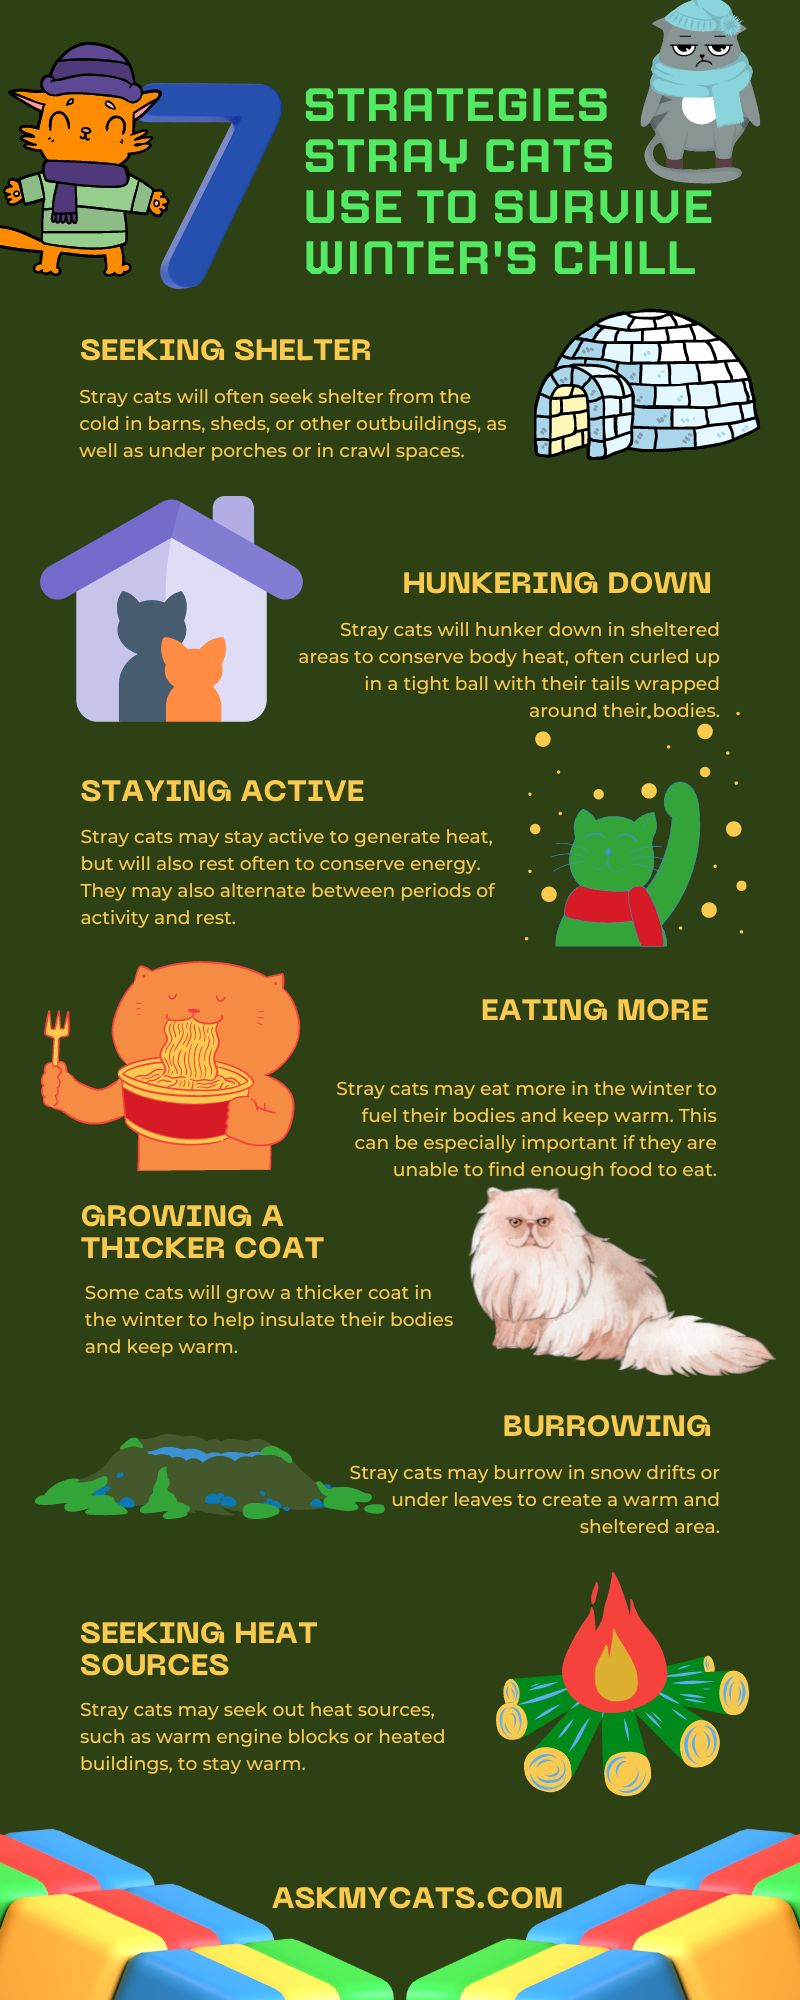 Strategies Stray Cats Use to Survive Winter's Chill (Infographic)